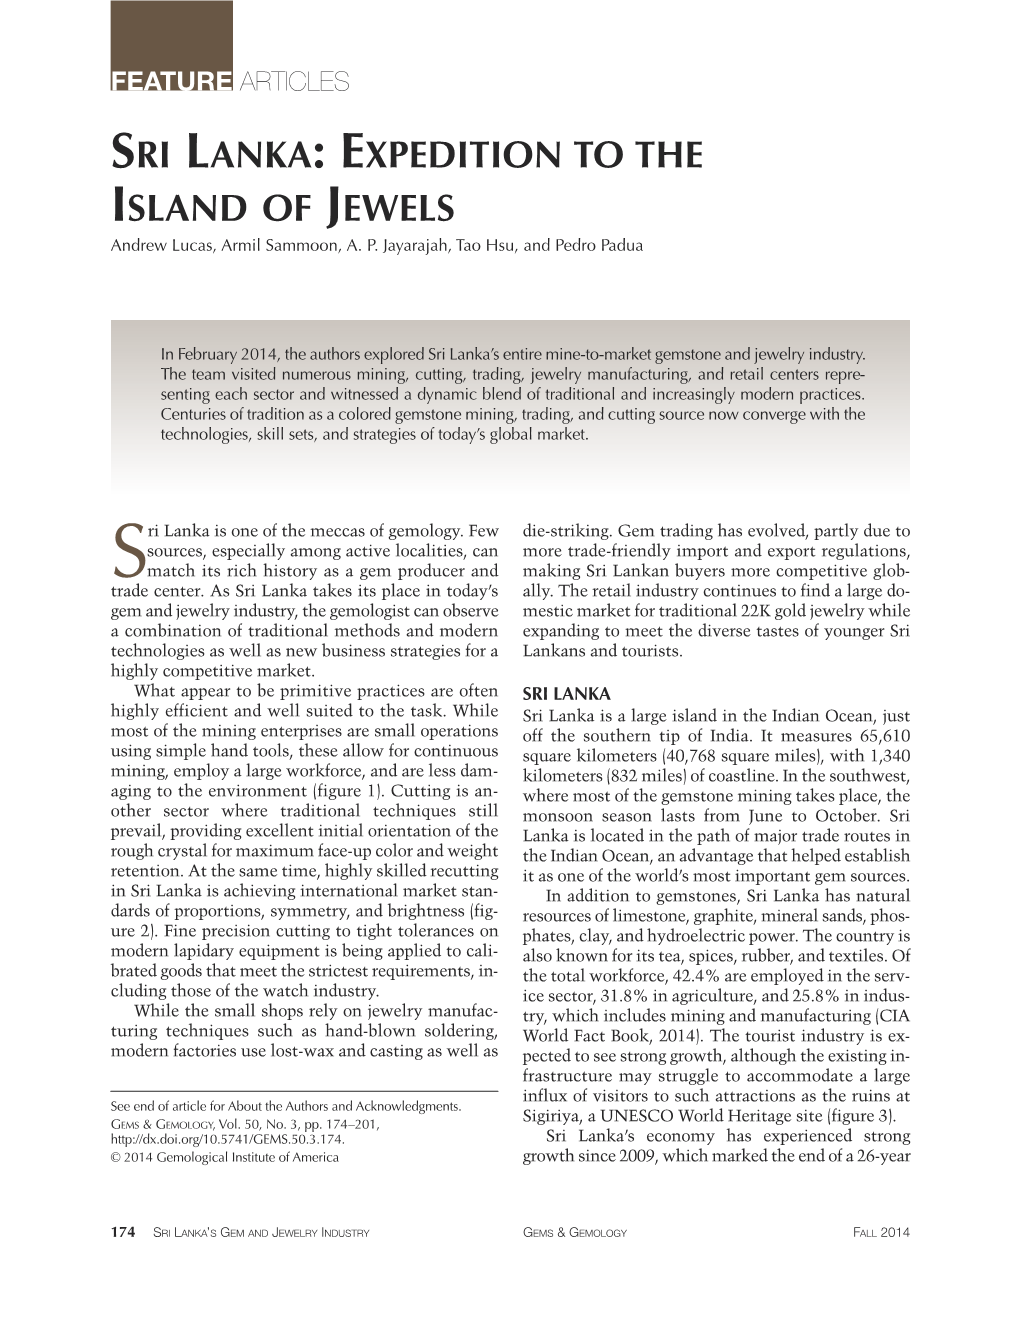 SRI LANKA: EXPEDITION to the ISLAND of JEWELS Andrew Lucas, Armil Sammoon, A